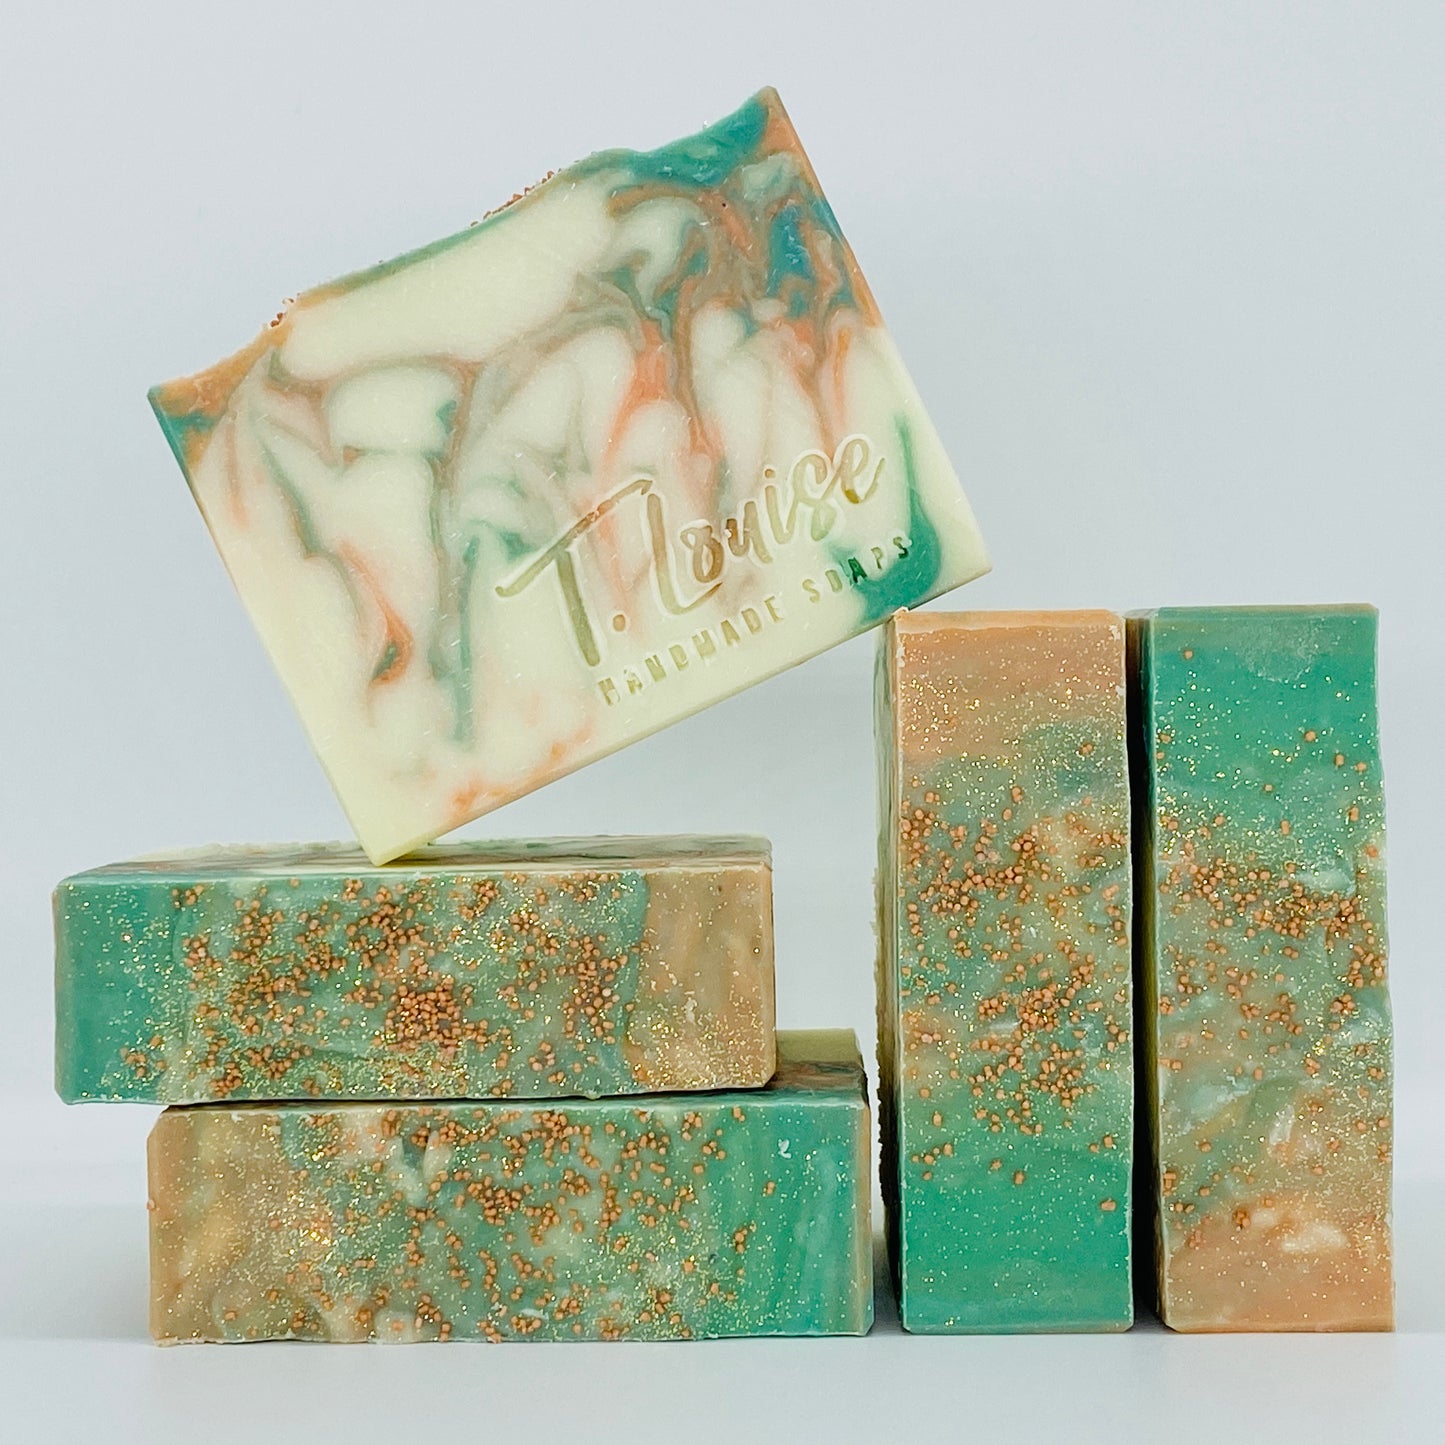 Woodlands Soap, coconut-free handmade soap T. Louise soaps